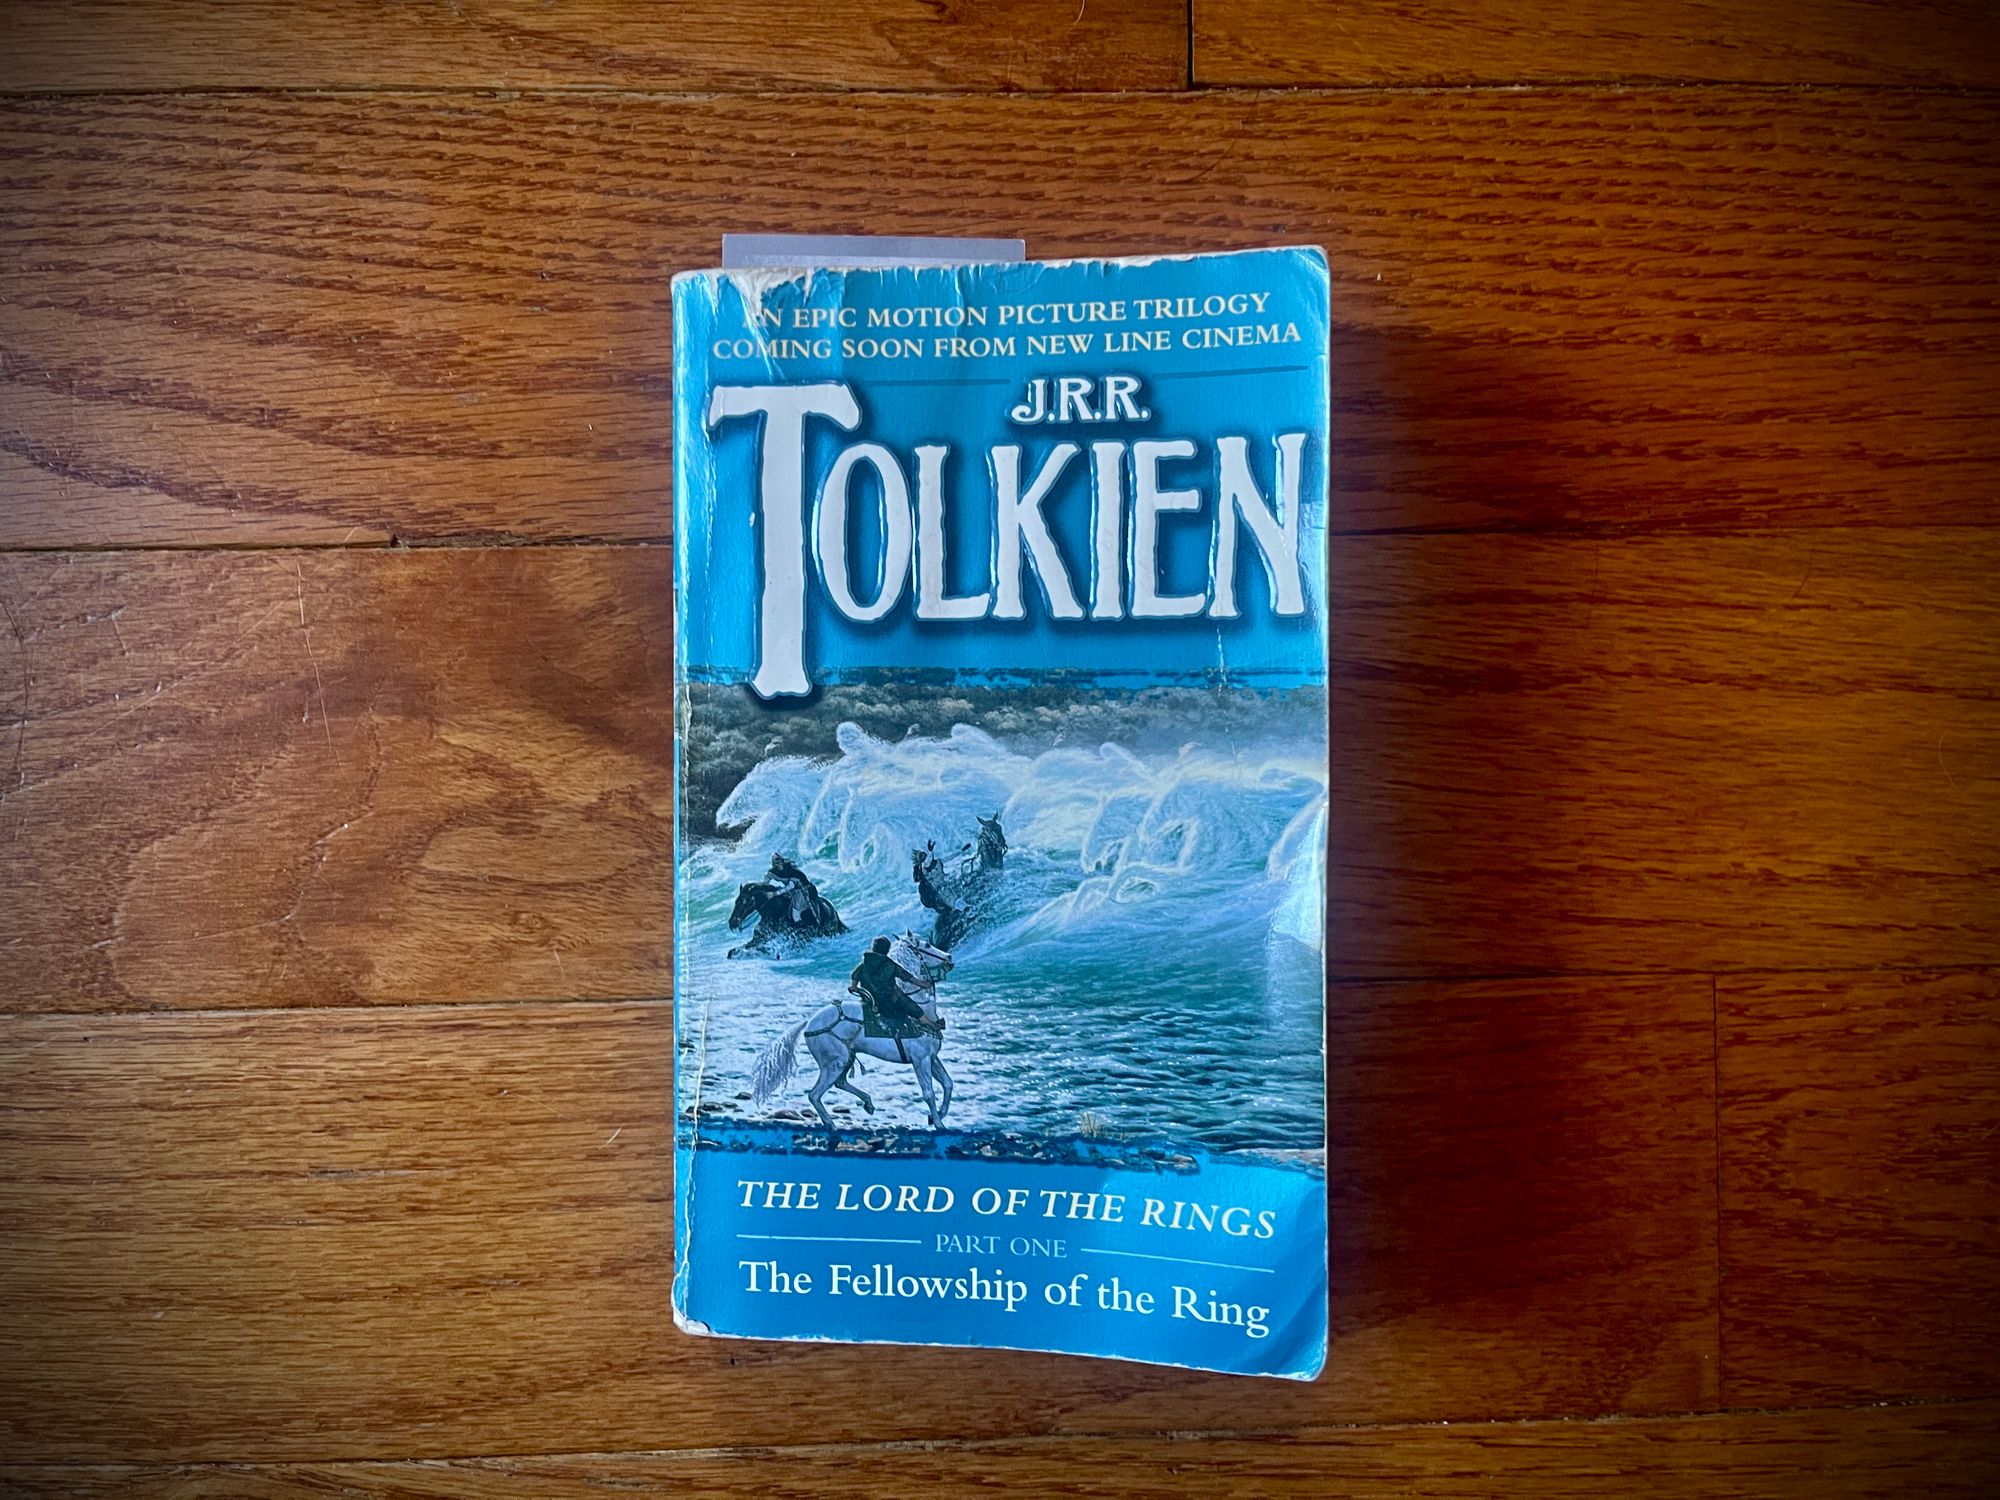 A battered paperback copy of J.R.R. Tolkien's Fellowship of the Ring with a blue cover.